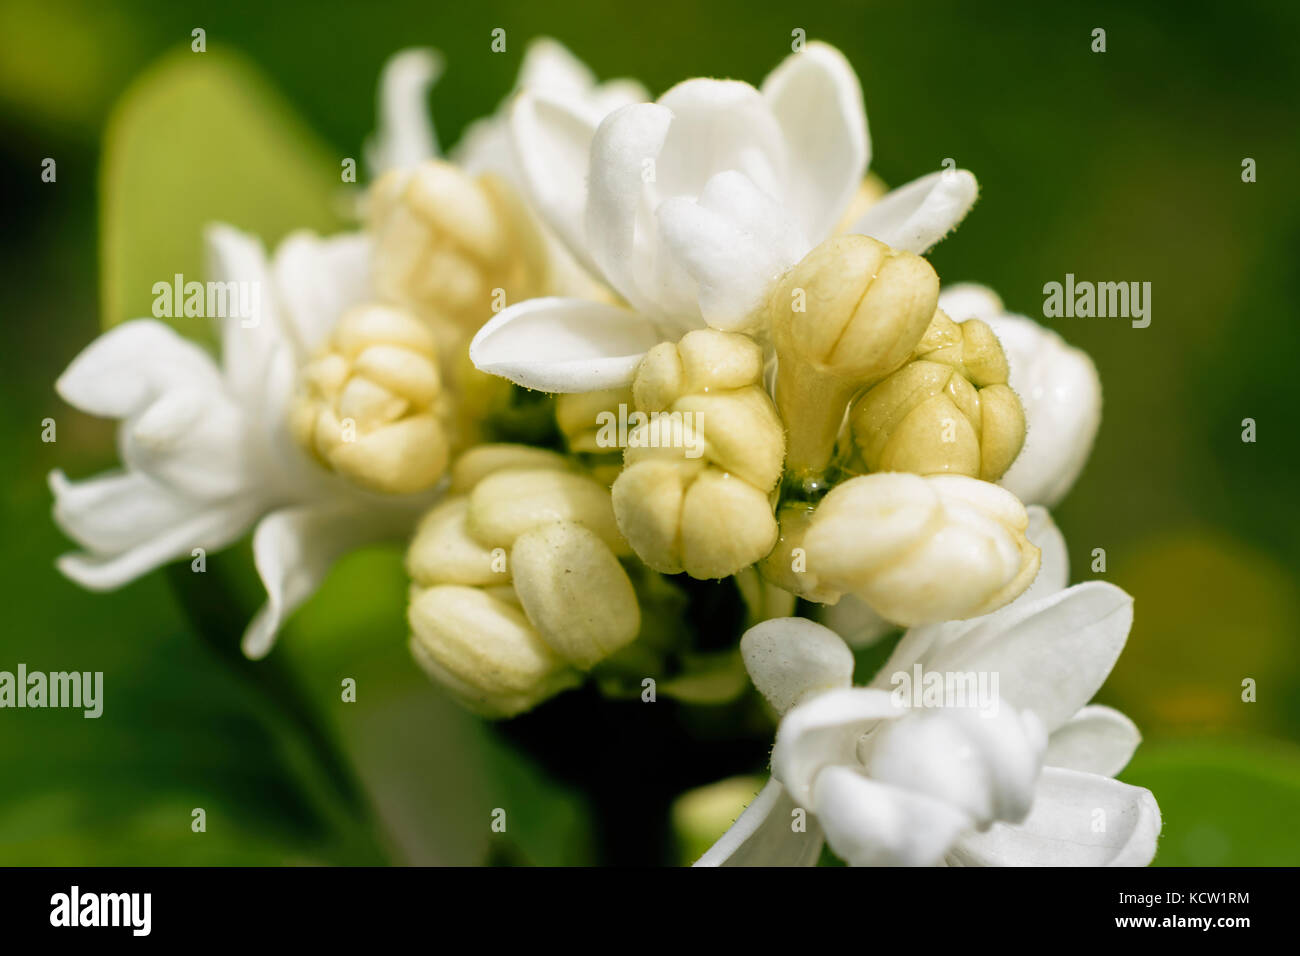 Close-Up Of White Delicate Lilac Or Syringa Vulgaris With Buds During Spring Stock Photo